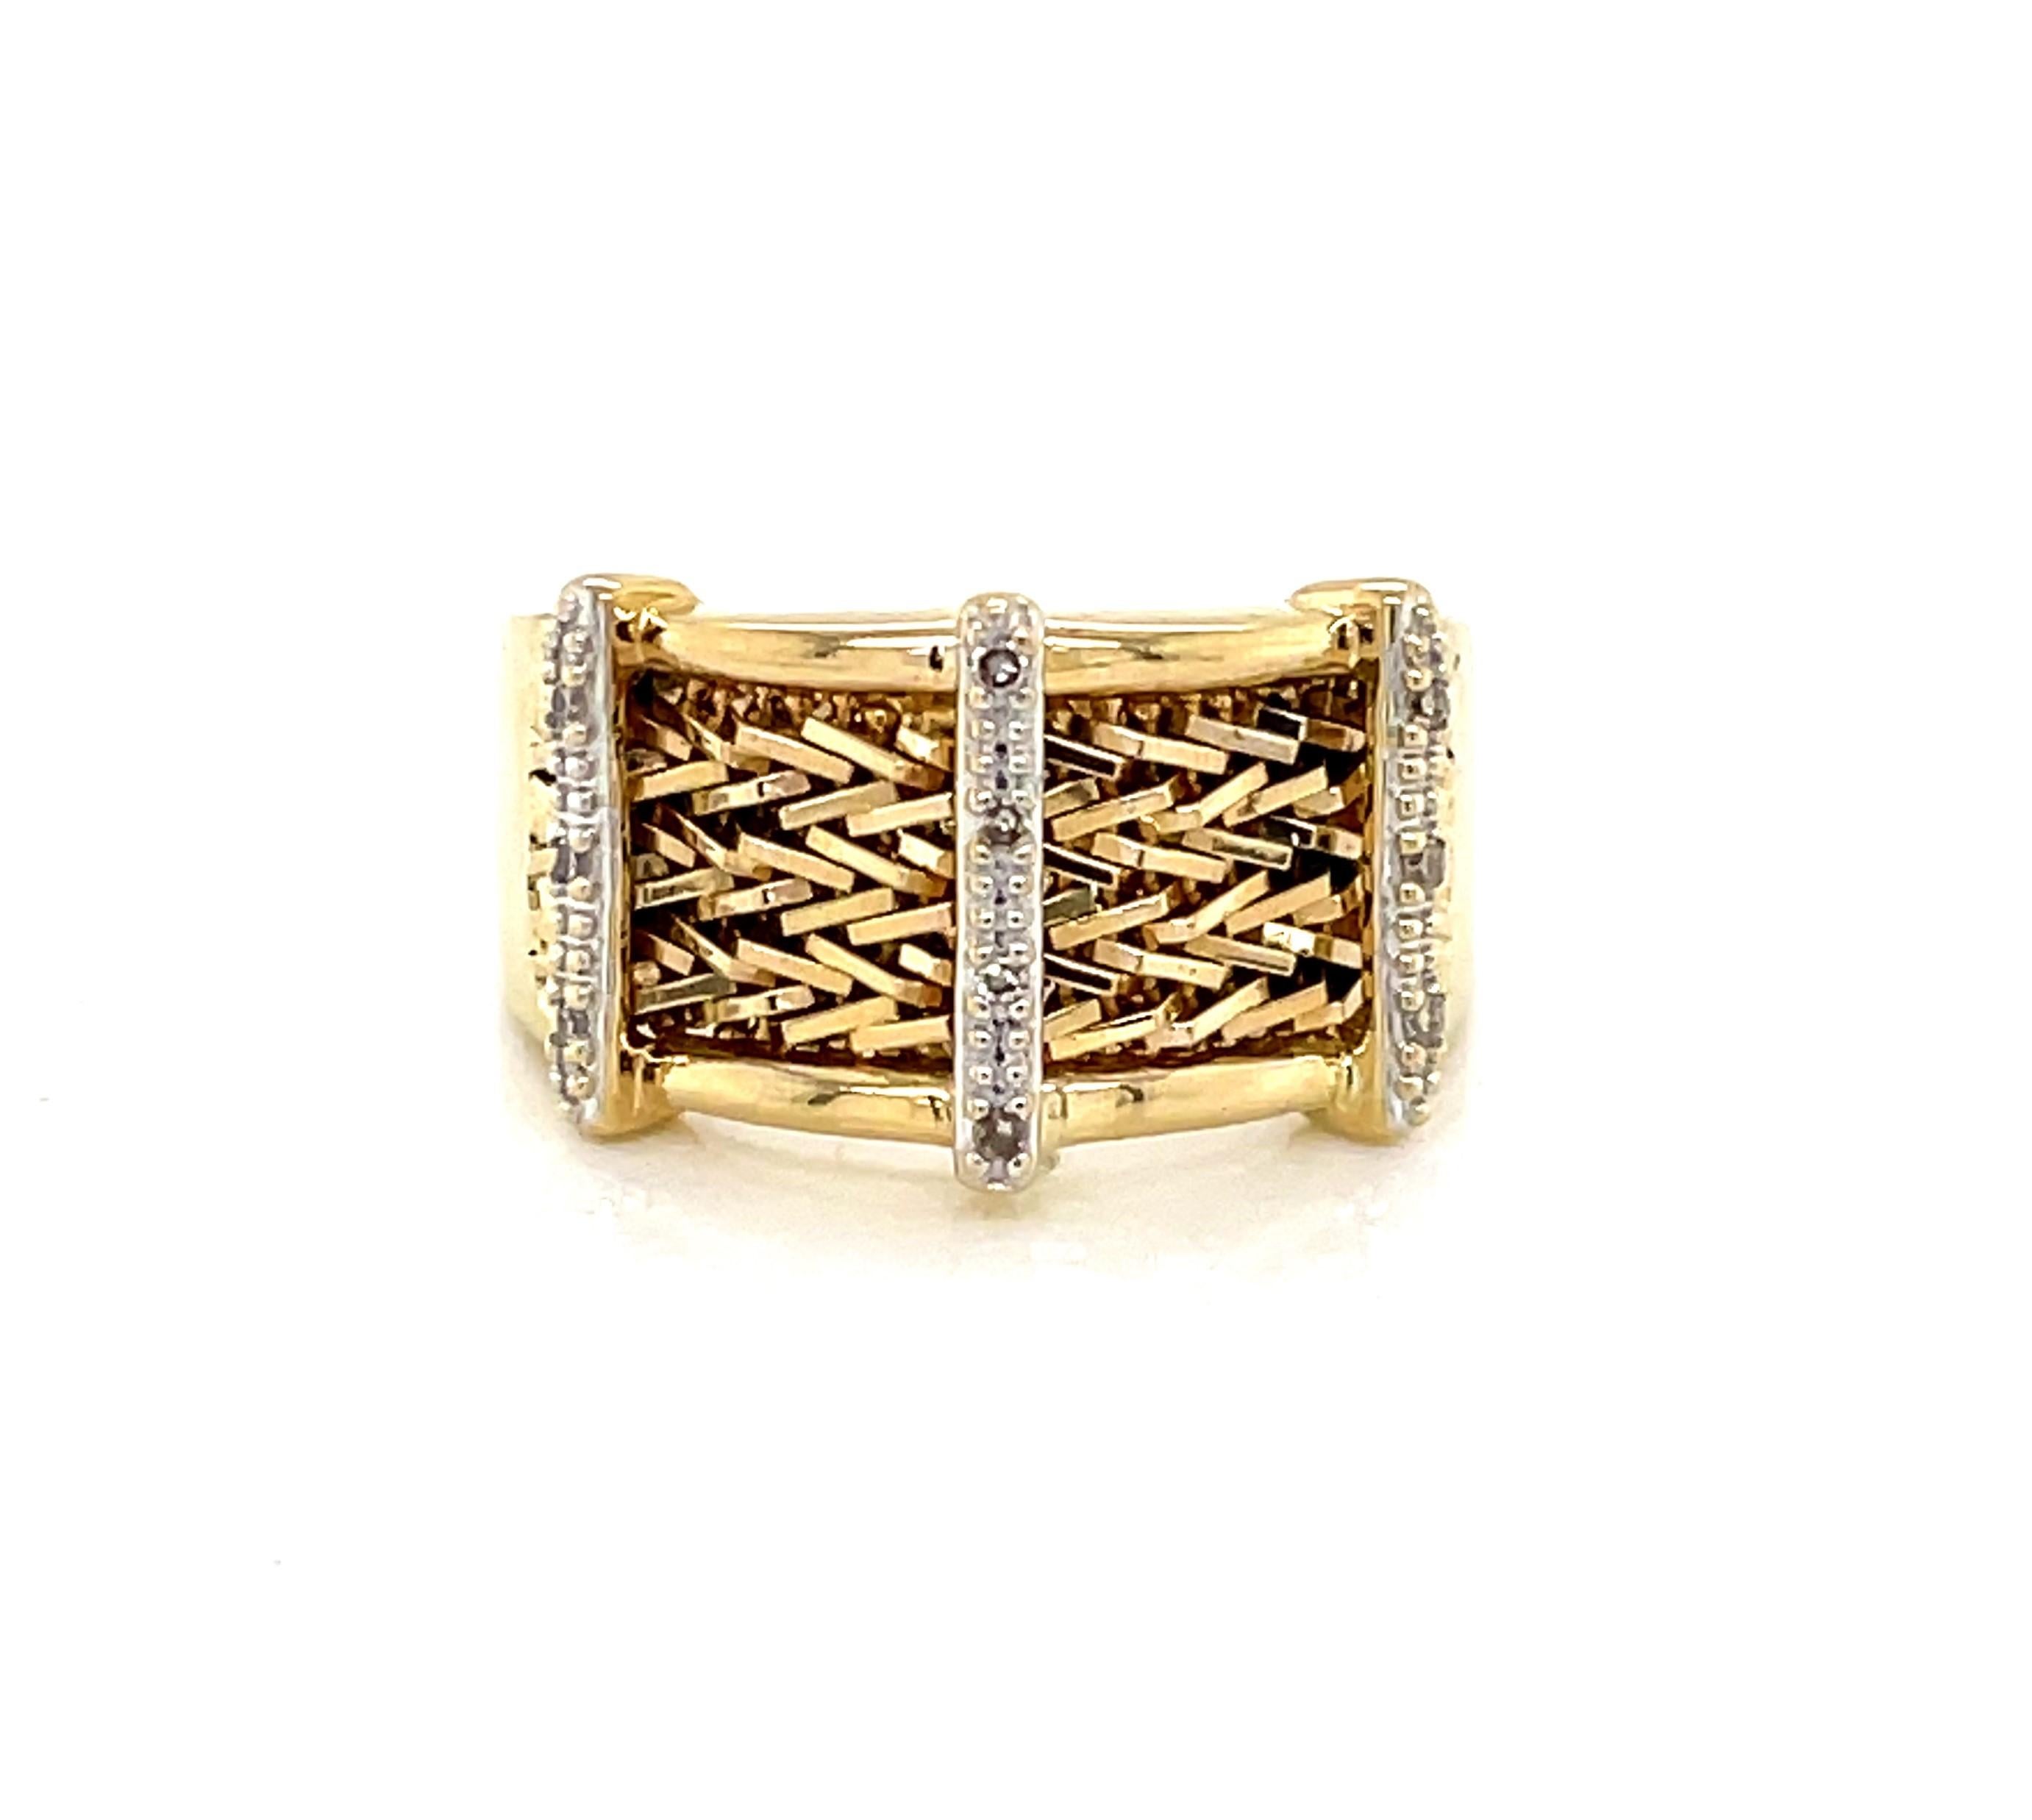 A unique front placket of woven fourteen karat 14k yellow gold is enhanced with vertical lines accented with ten .01 carat round faceted diamonds on this unique band. Generously measuring approximately 11mm wide at the face and graduating back to